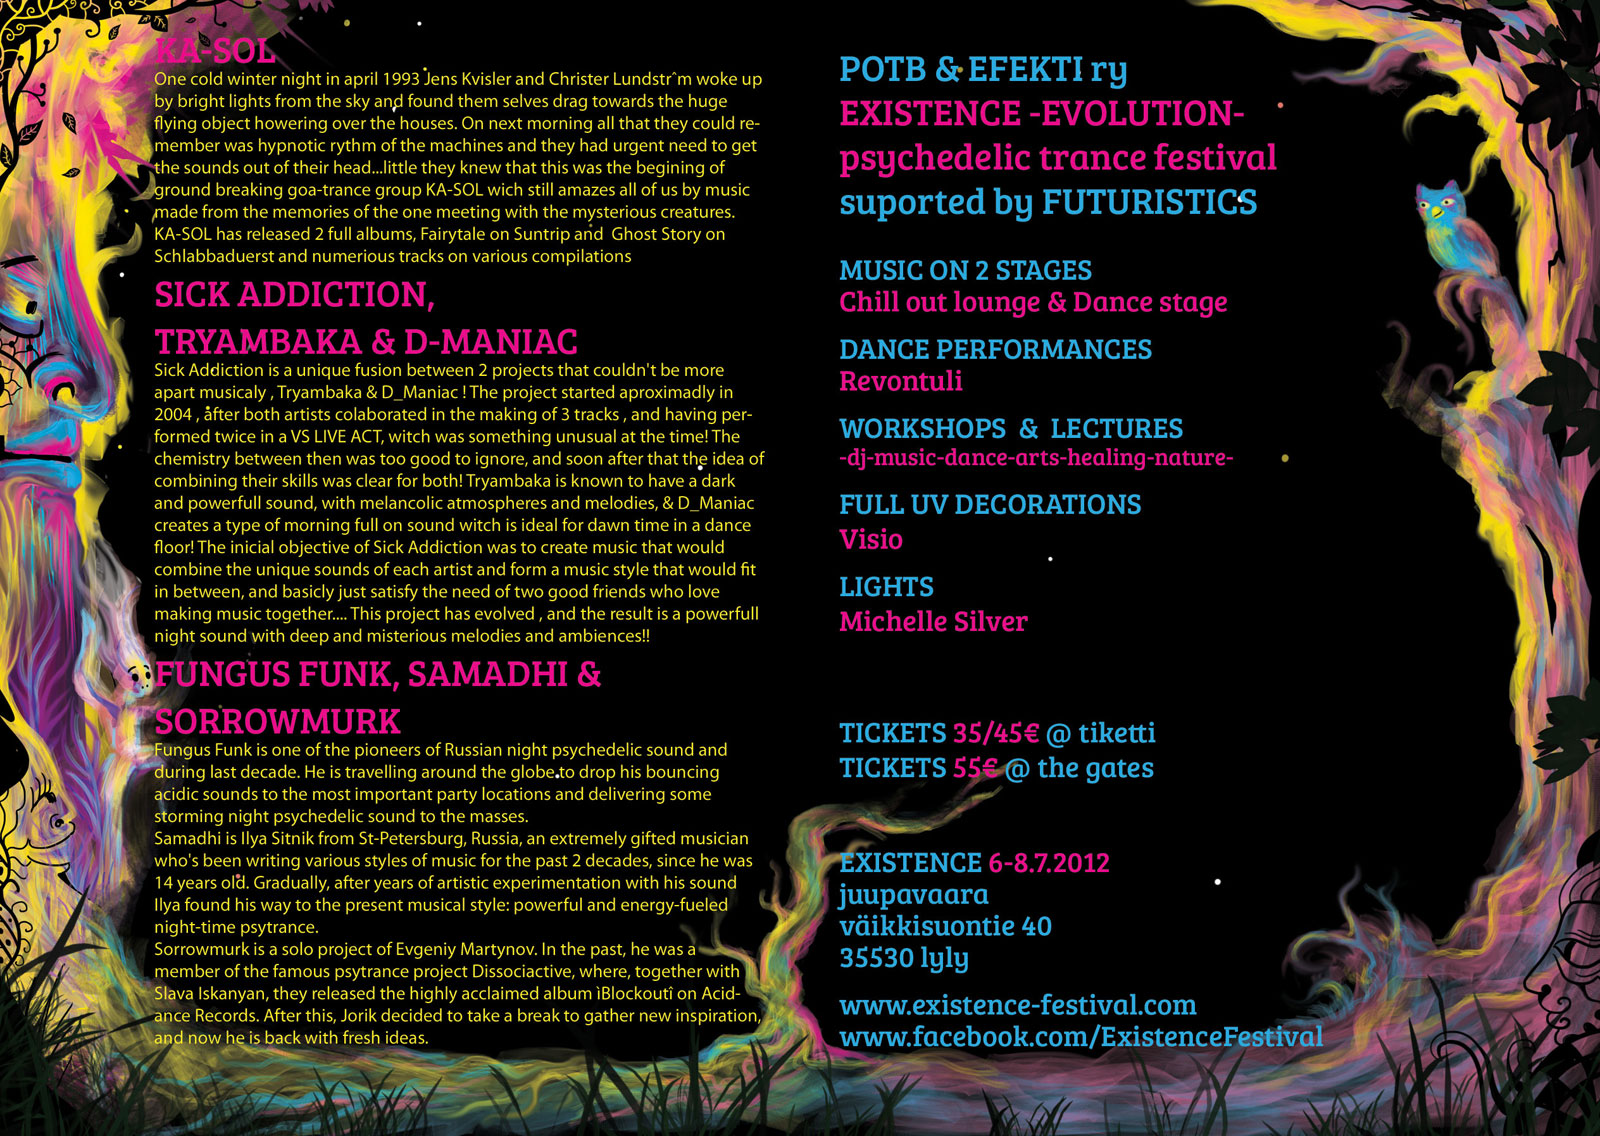 Existence festival 2012 psychedelic trance flyer design by Andrei Verner